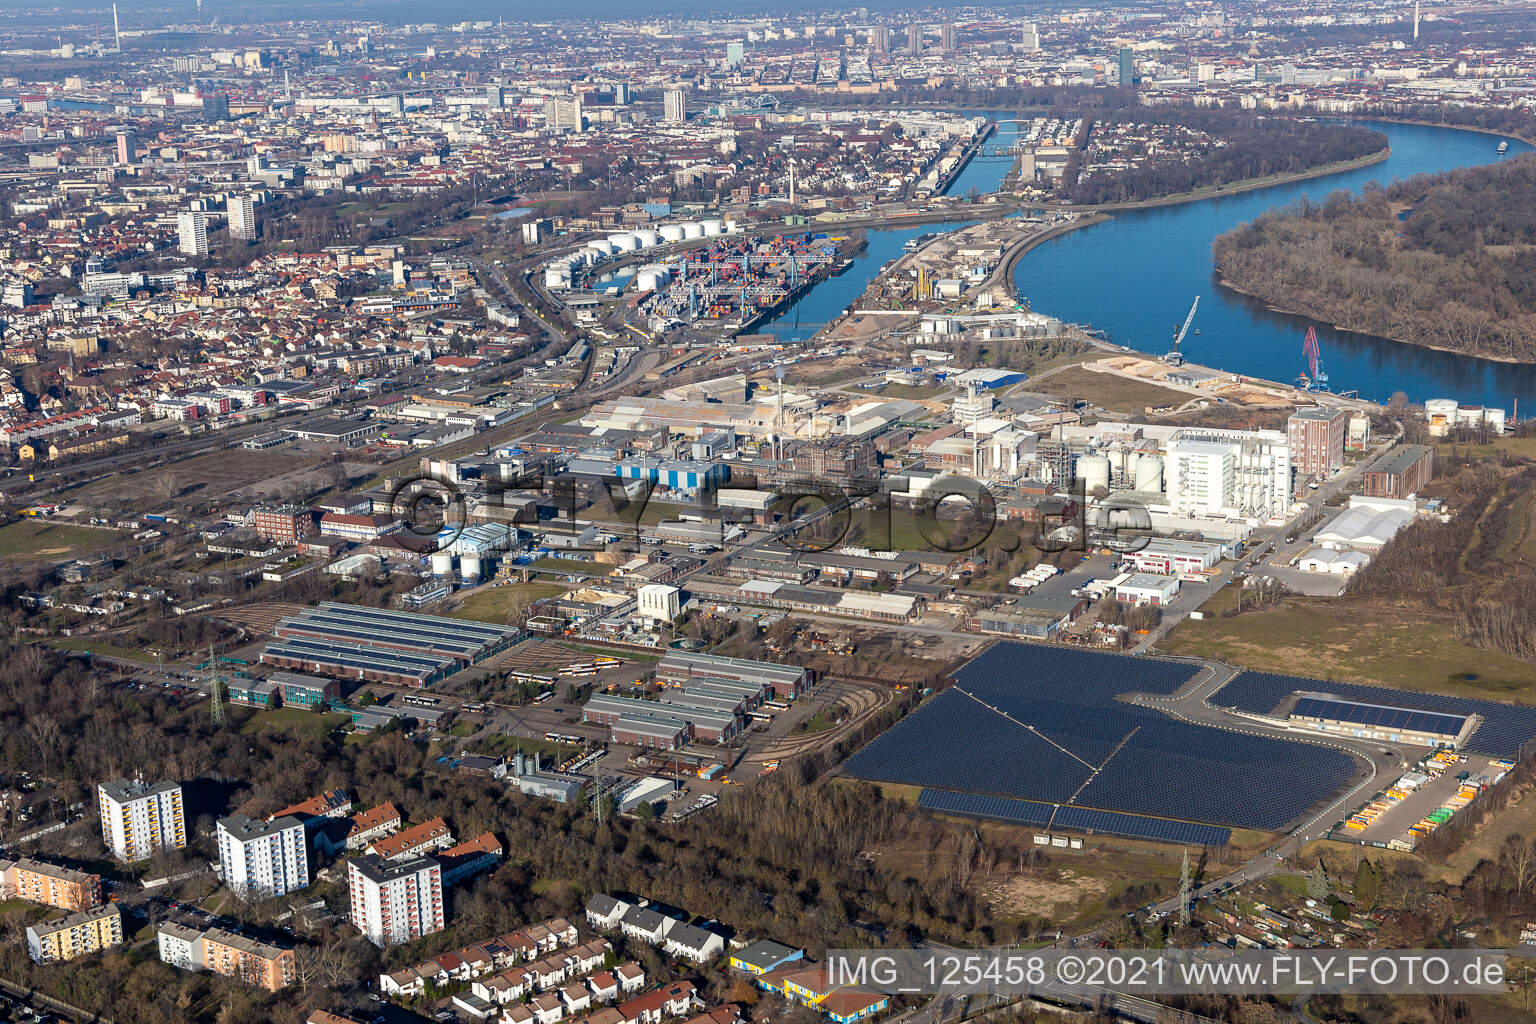 Aerial view of Industrial and commercial area in the district Rheingoenheim in Ludwigshafen am Rhein in the state Rhineland-Palatinate, Germany